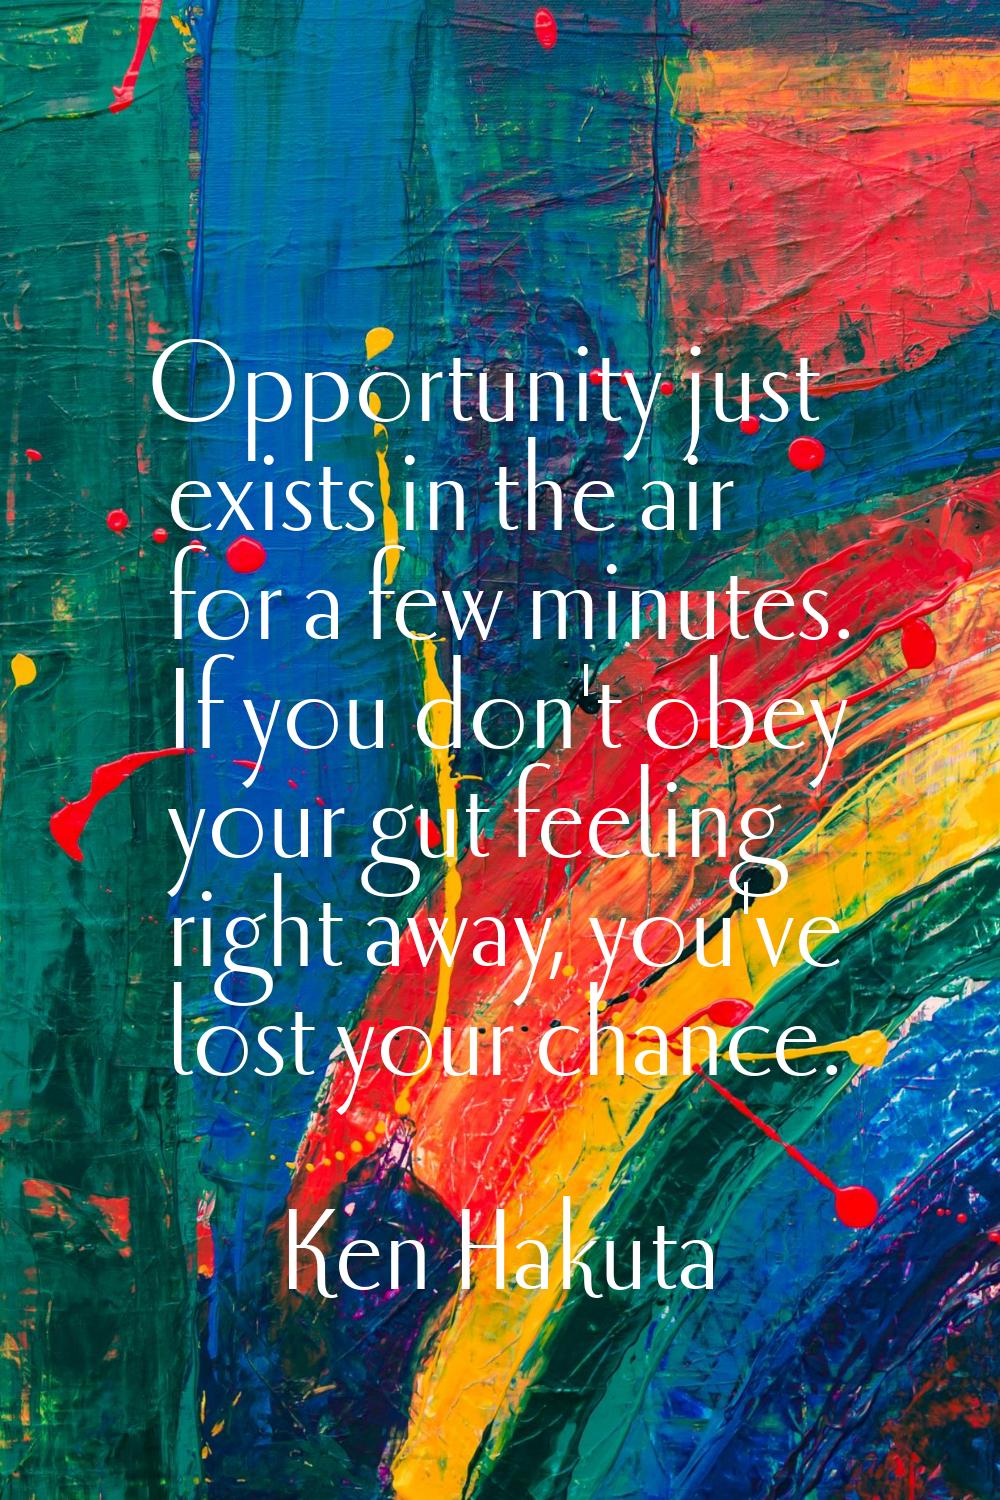 Opportunity just exists in the air for a few minutes. If you don't obey your gut feeling right away